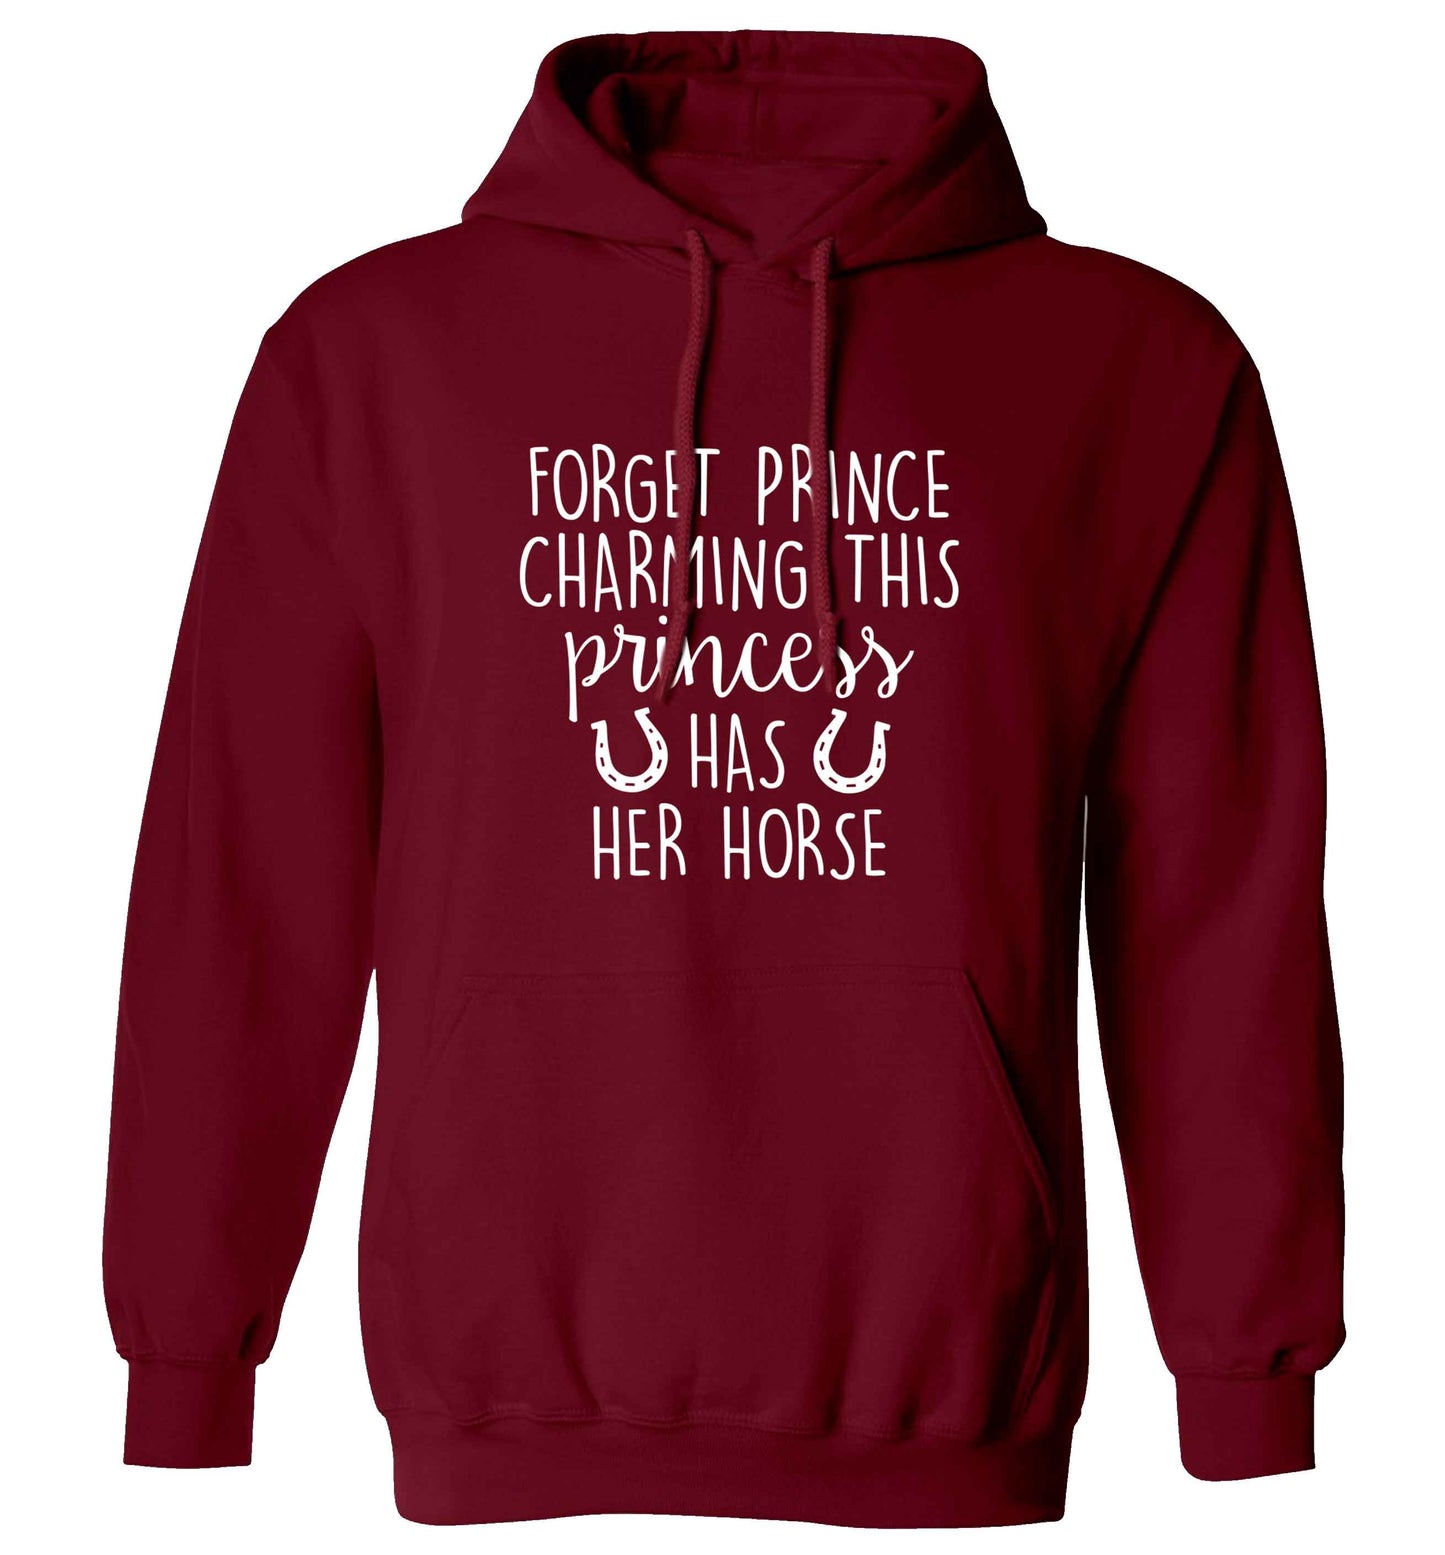 Forget prince charming this princess has her horse adults unisex maroon hoodie 2XL